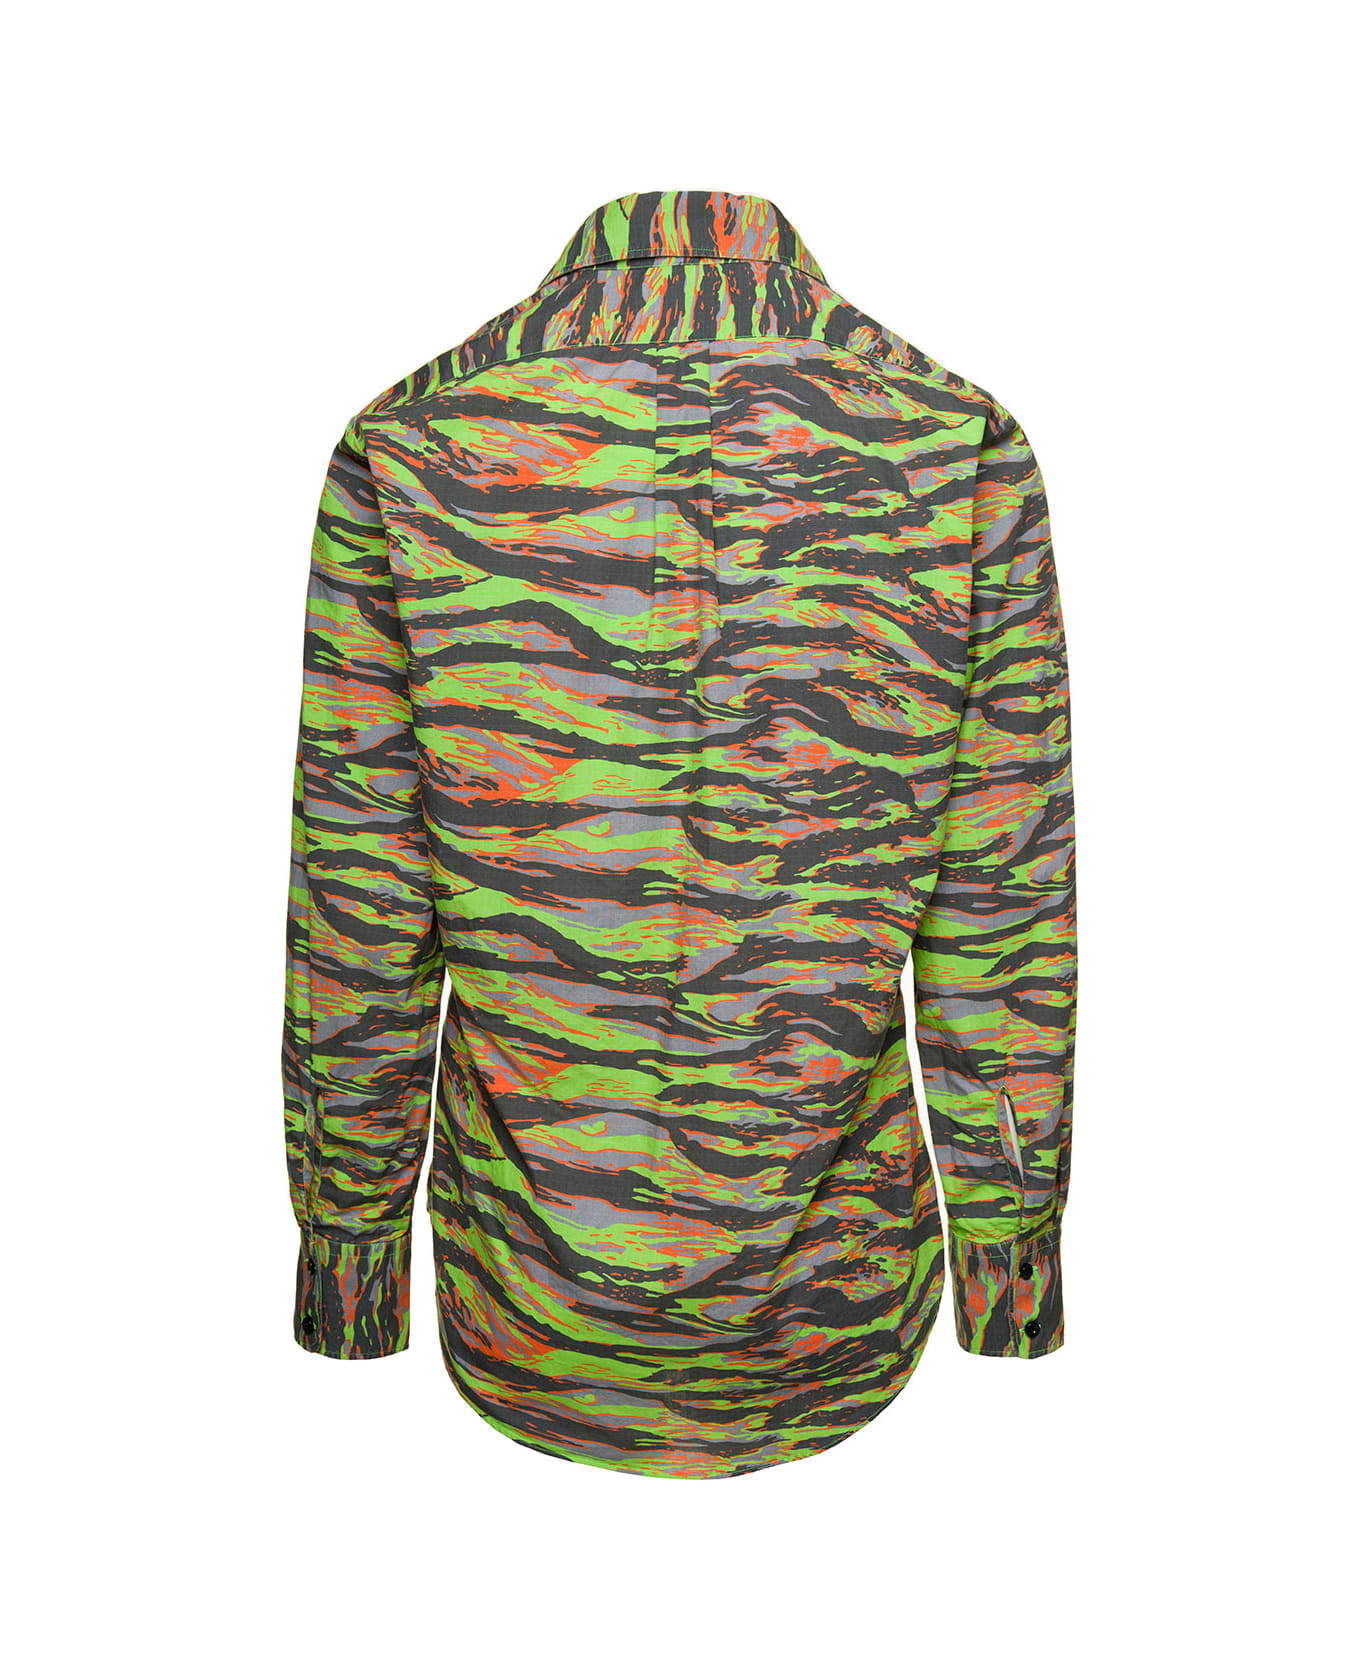 ERL Green Long Sleeve Shirt With Graphic Print In Cotton - Multicolor シャツ